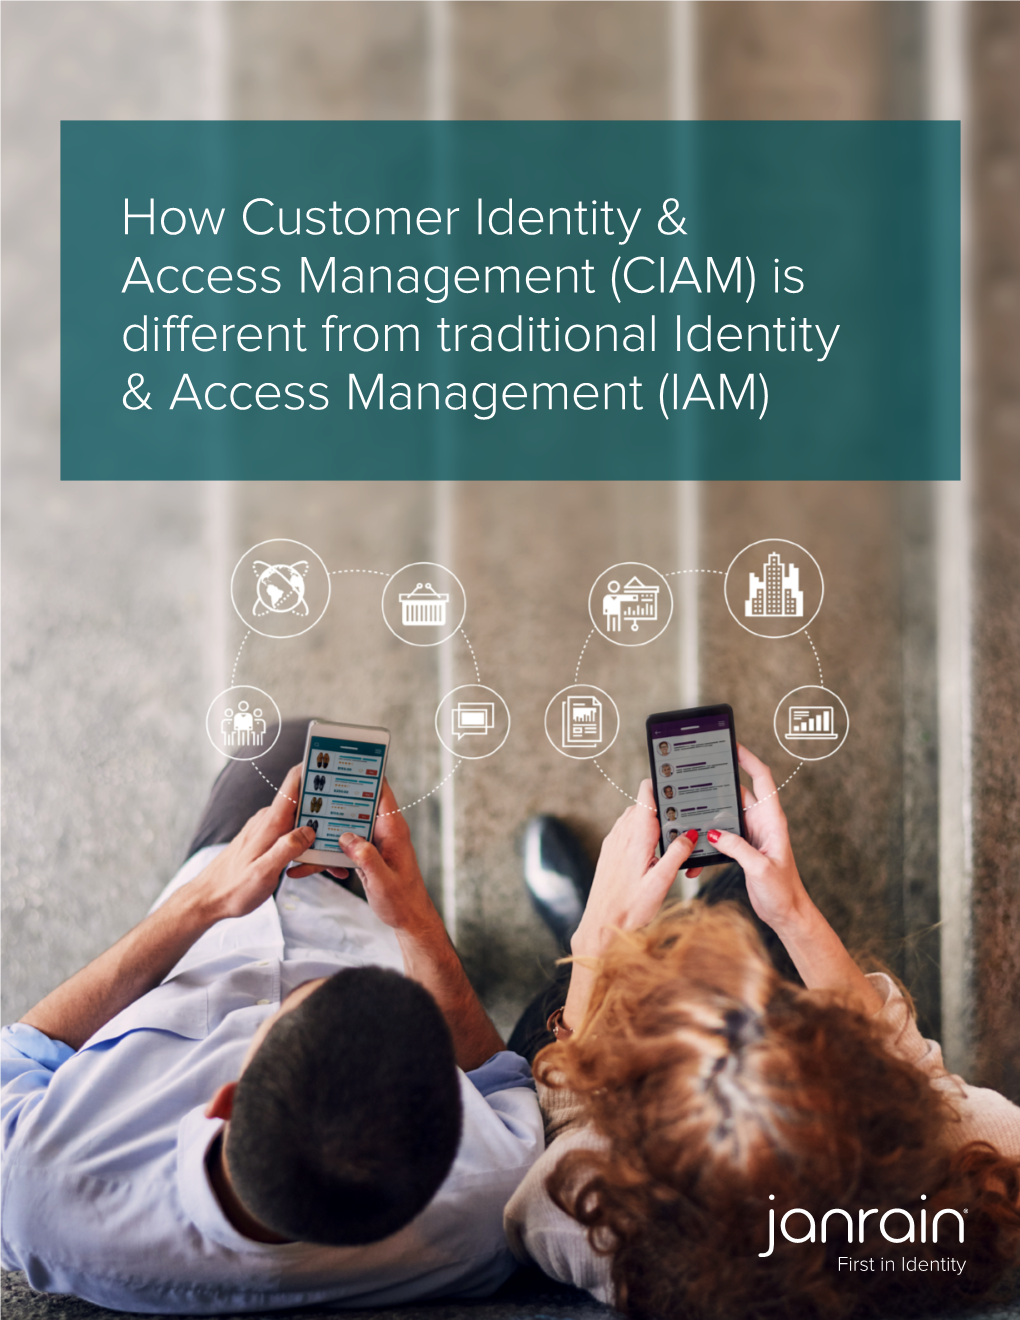 How Customer Identity & Access Management (CIAM) Is Different